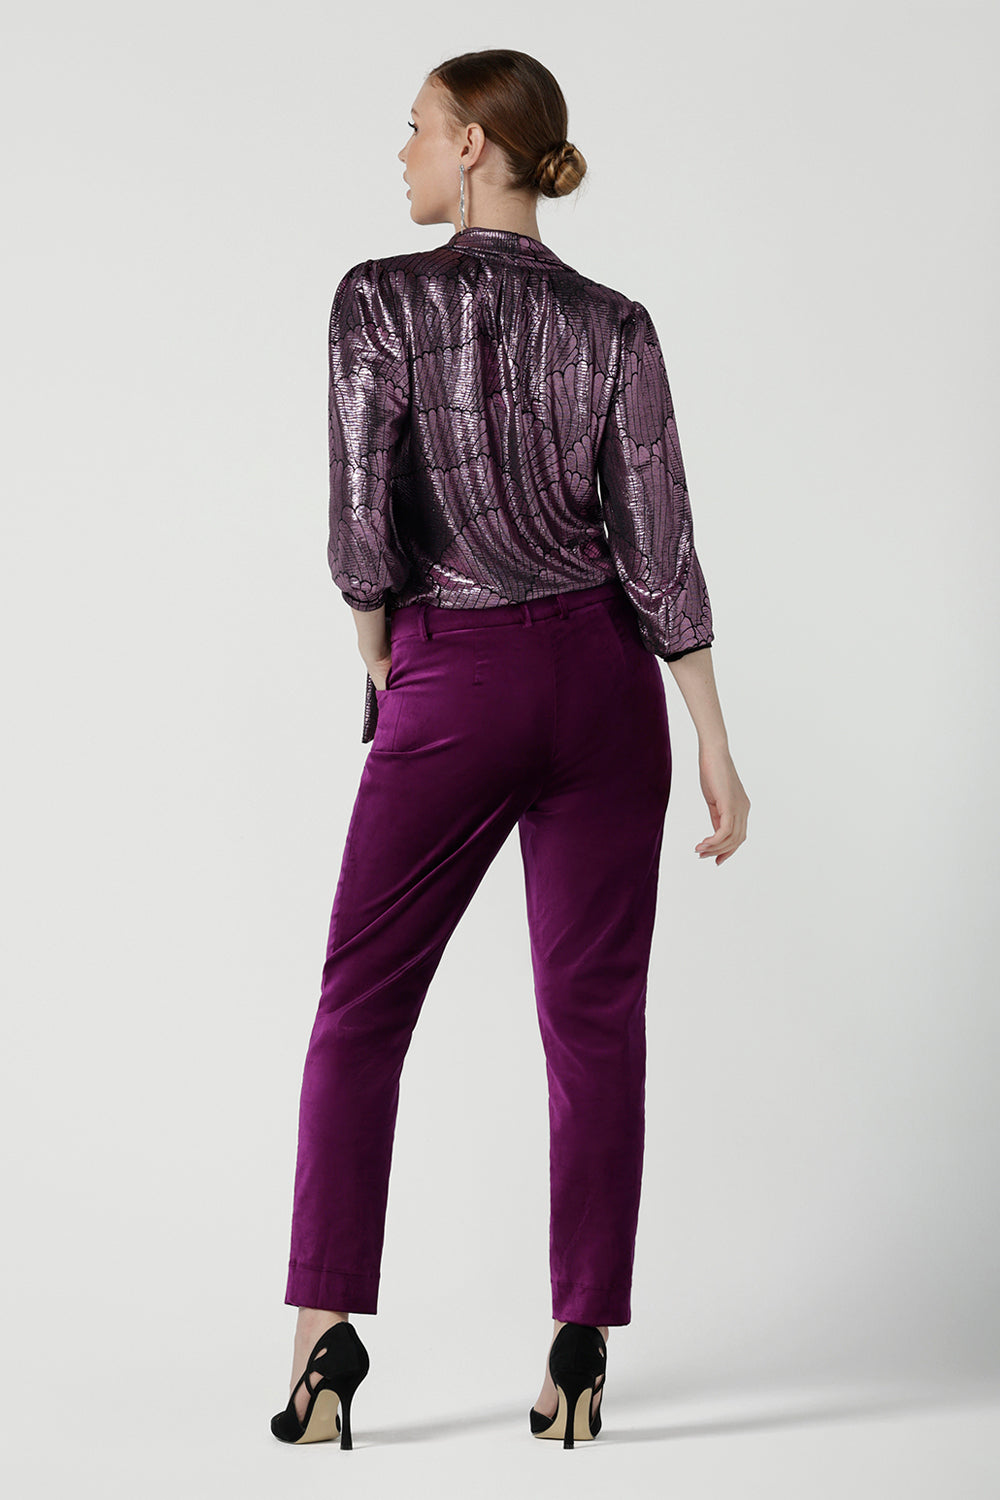 Back view of a size 10 woman wears the Keaton Pant in Magenta velveteen. Stylish up late evening wear. Size 10 up late.